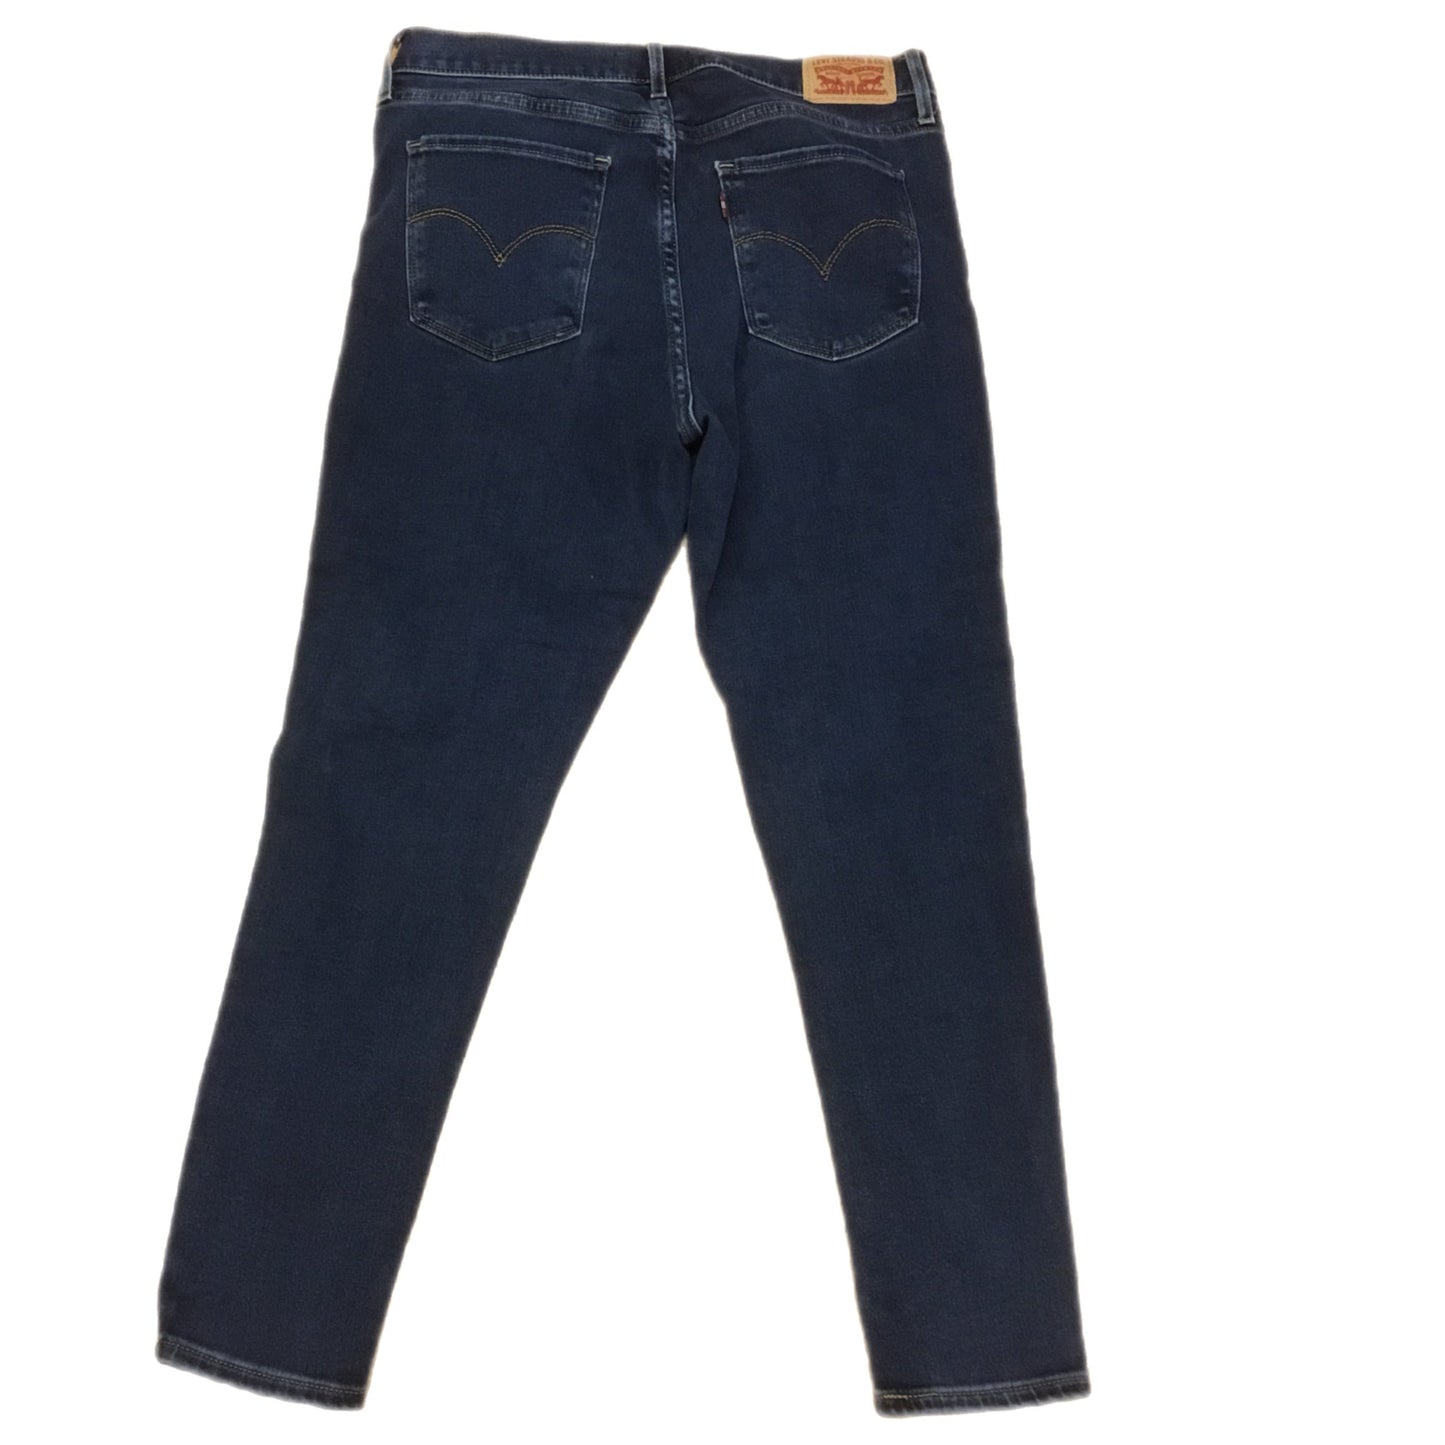 Jeans Skinny By Levis  Size: 10